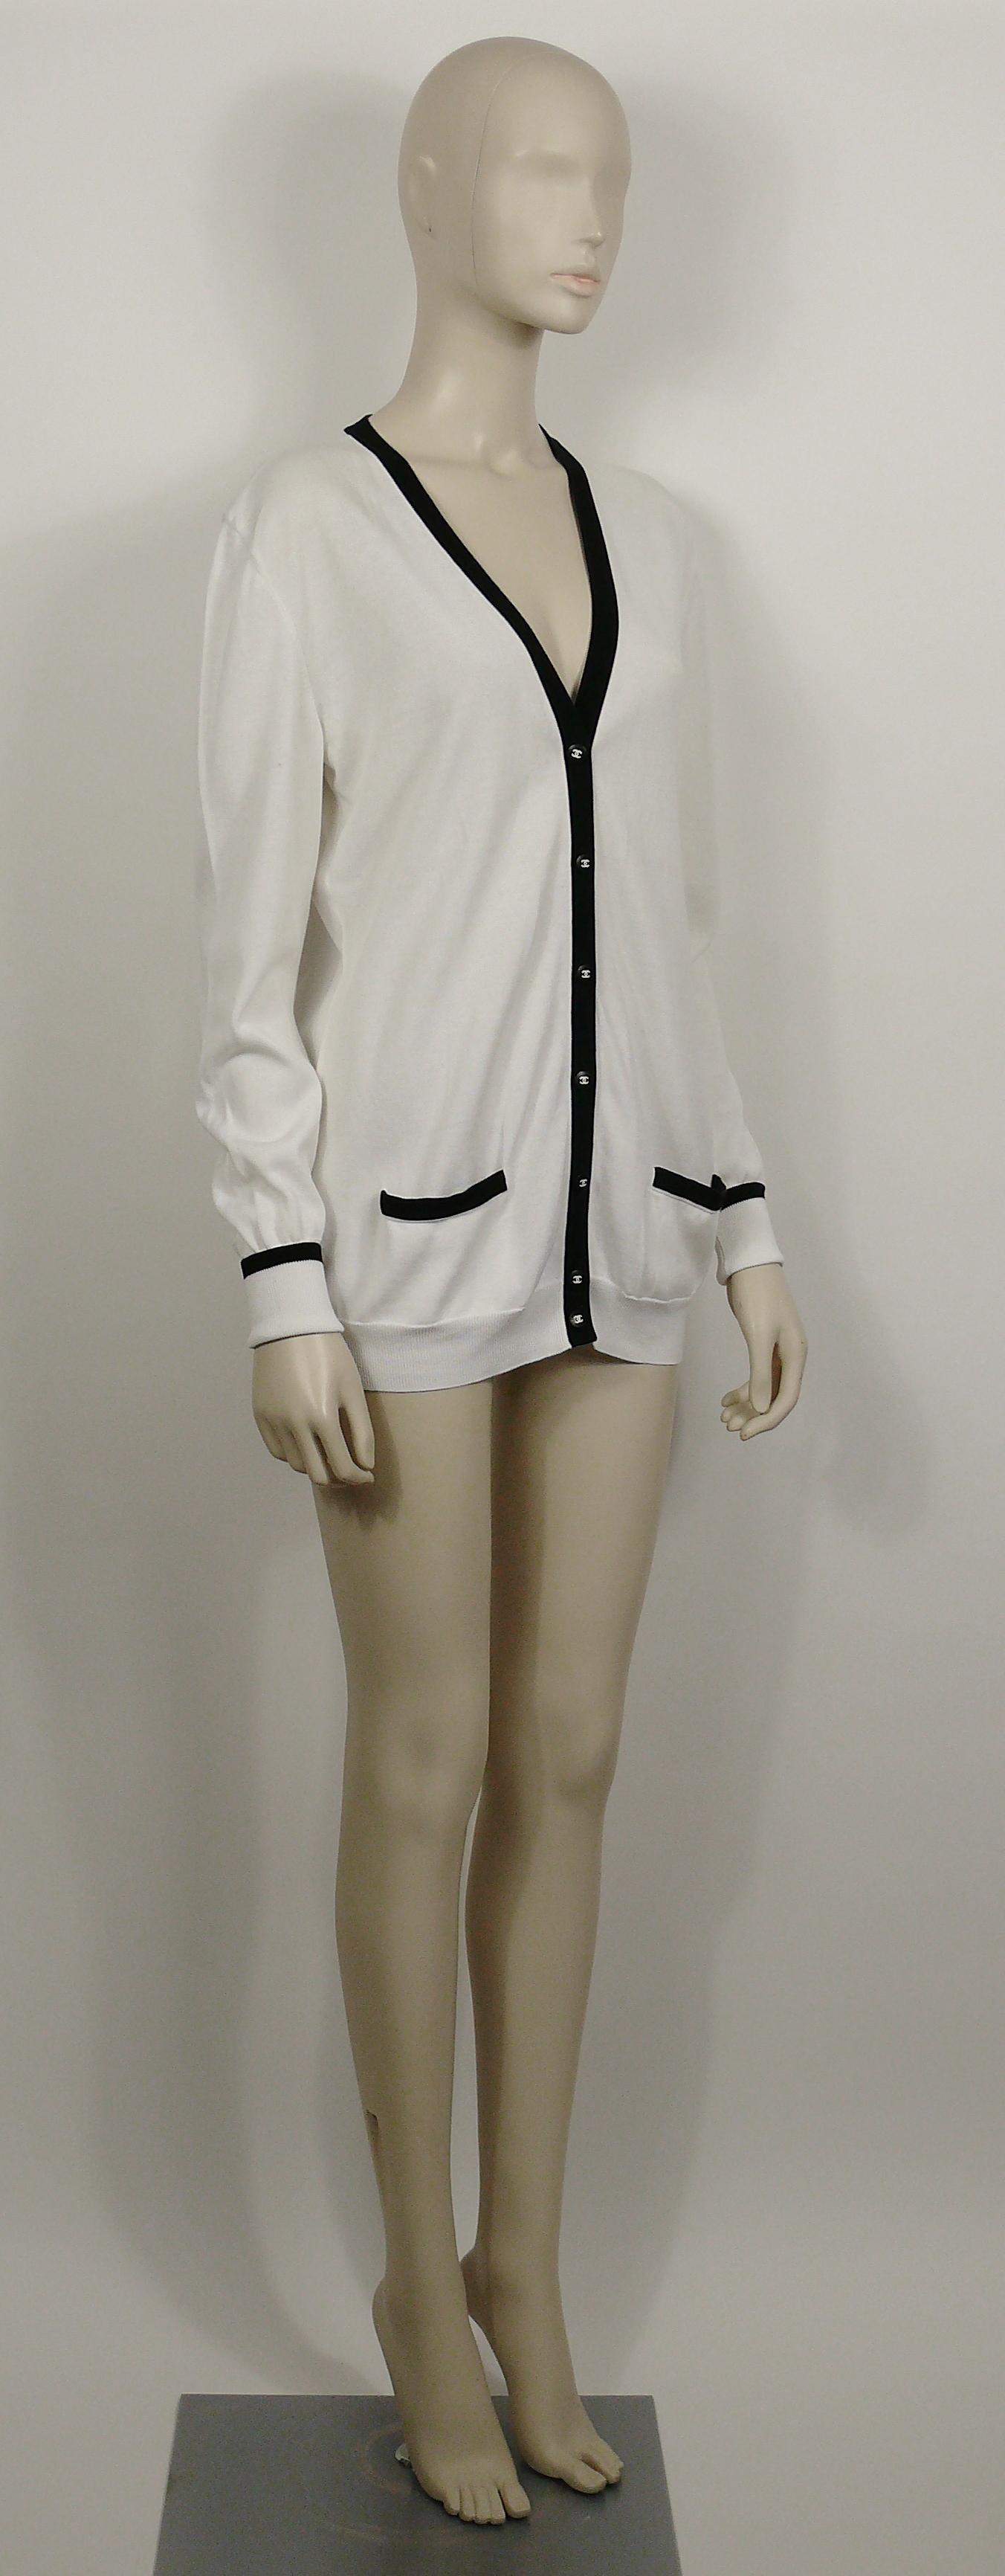 CHANEL vintage classic white and black cotton cardigan featuring logo buttons, from the Spring 1996 Collection.

2 pockets.
Roll up cuffs.

Label reads CHANEL BOUTIQUE Made in France 96 P.

Size tag reads : 42.
Please refer to measurements.